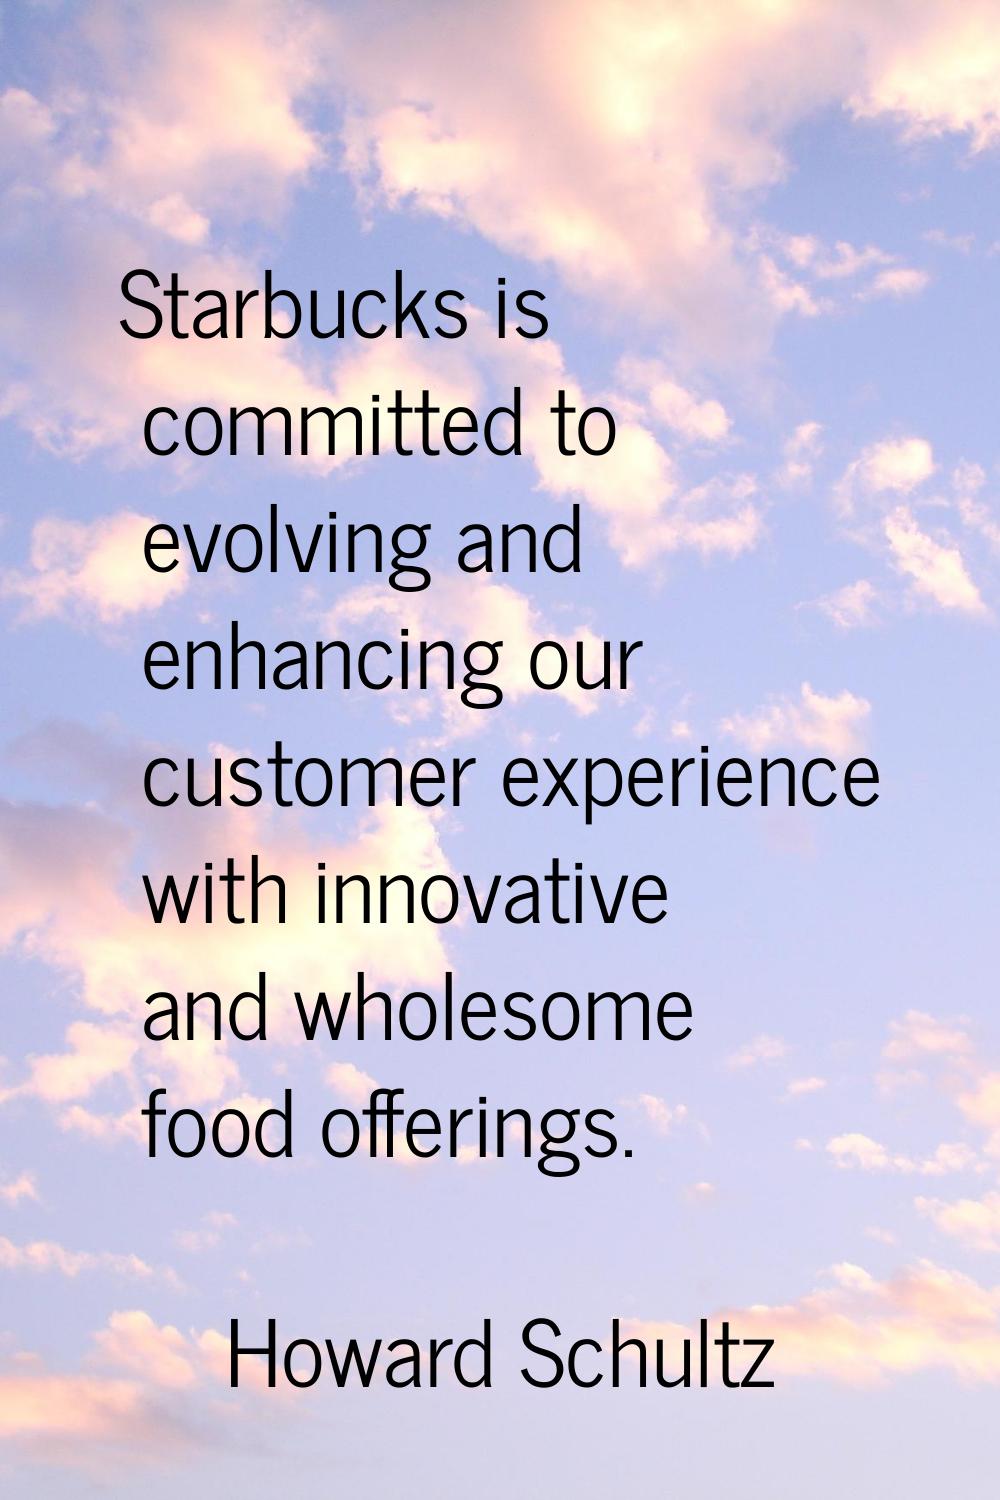 Starbucks is committed to evolving and enhancing our customer experience with innovative and wholes